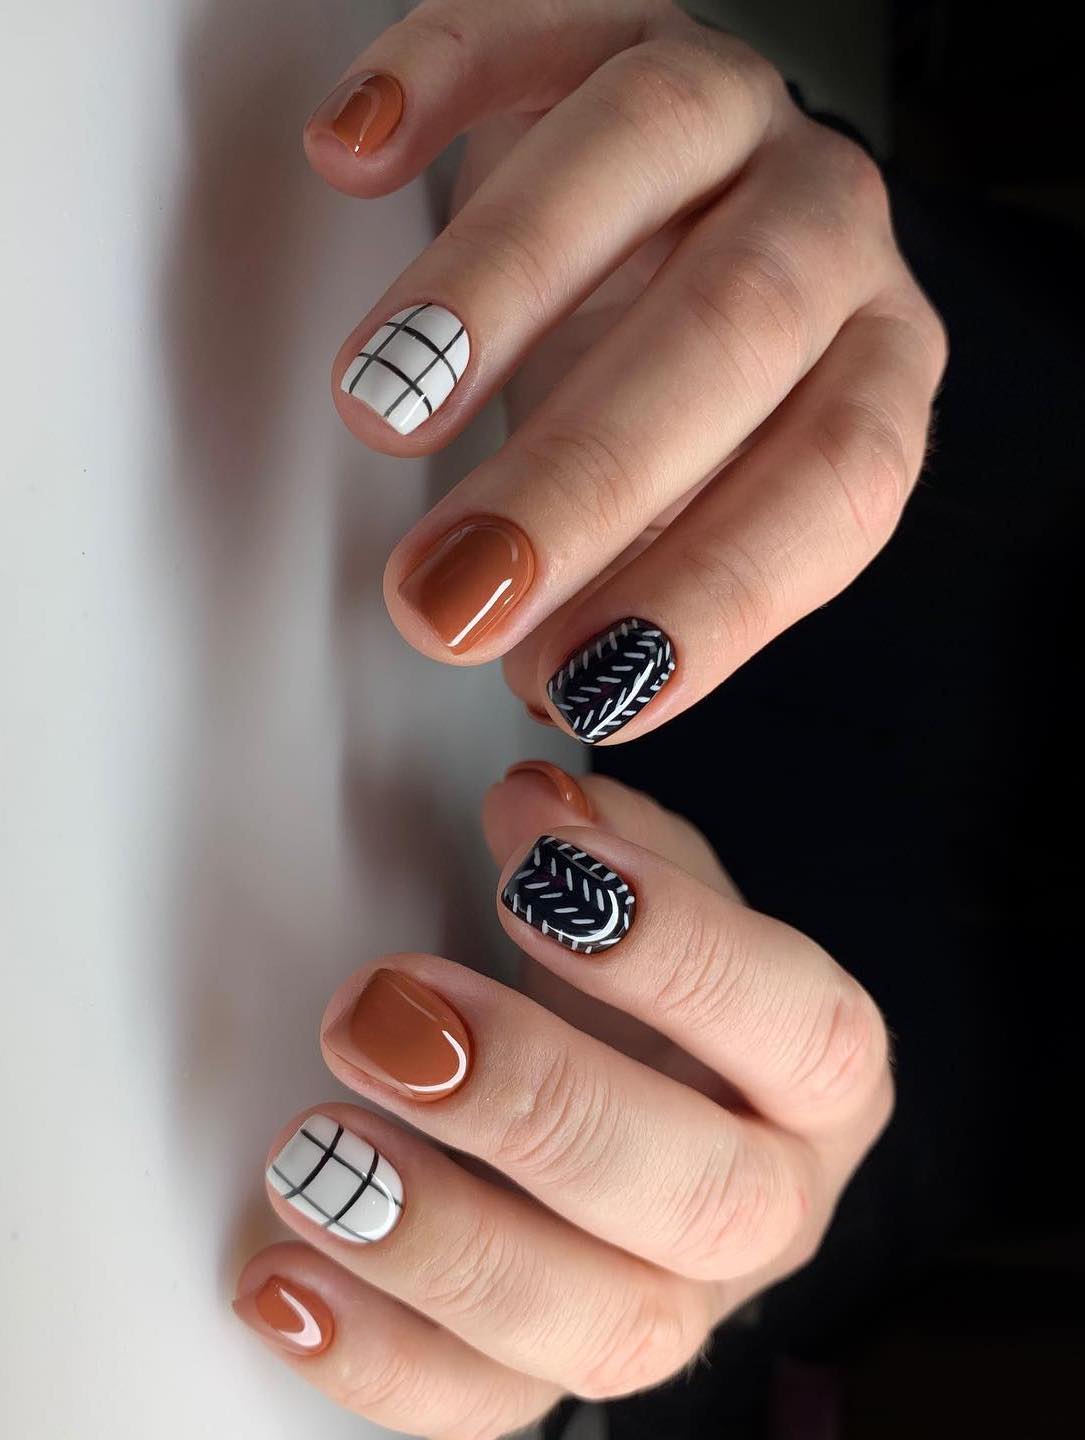 a hand with short square nails painted with solid colored burnt orange, white nails with black grids, and black nails with a white line pattern